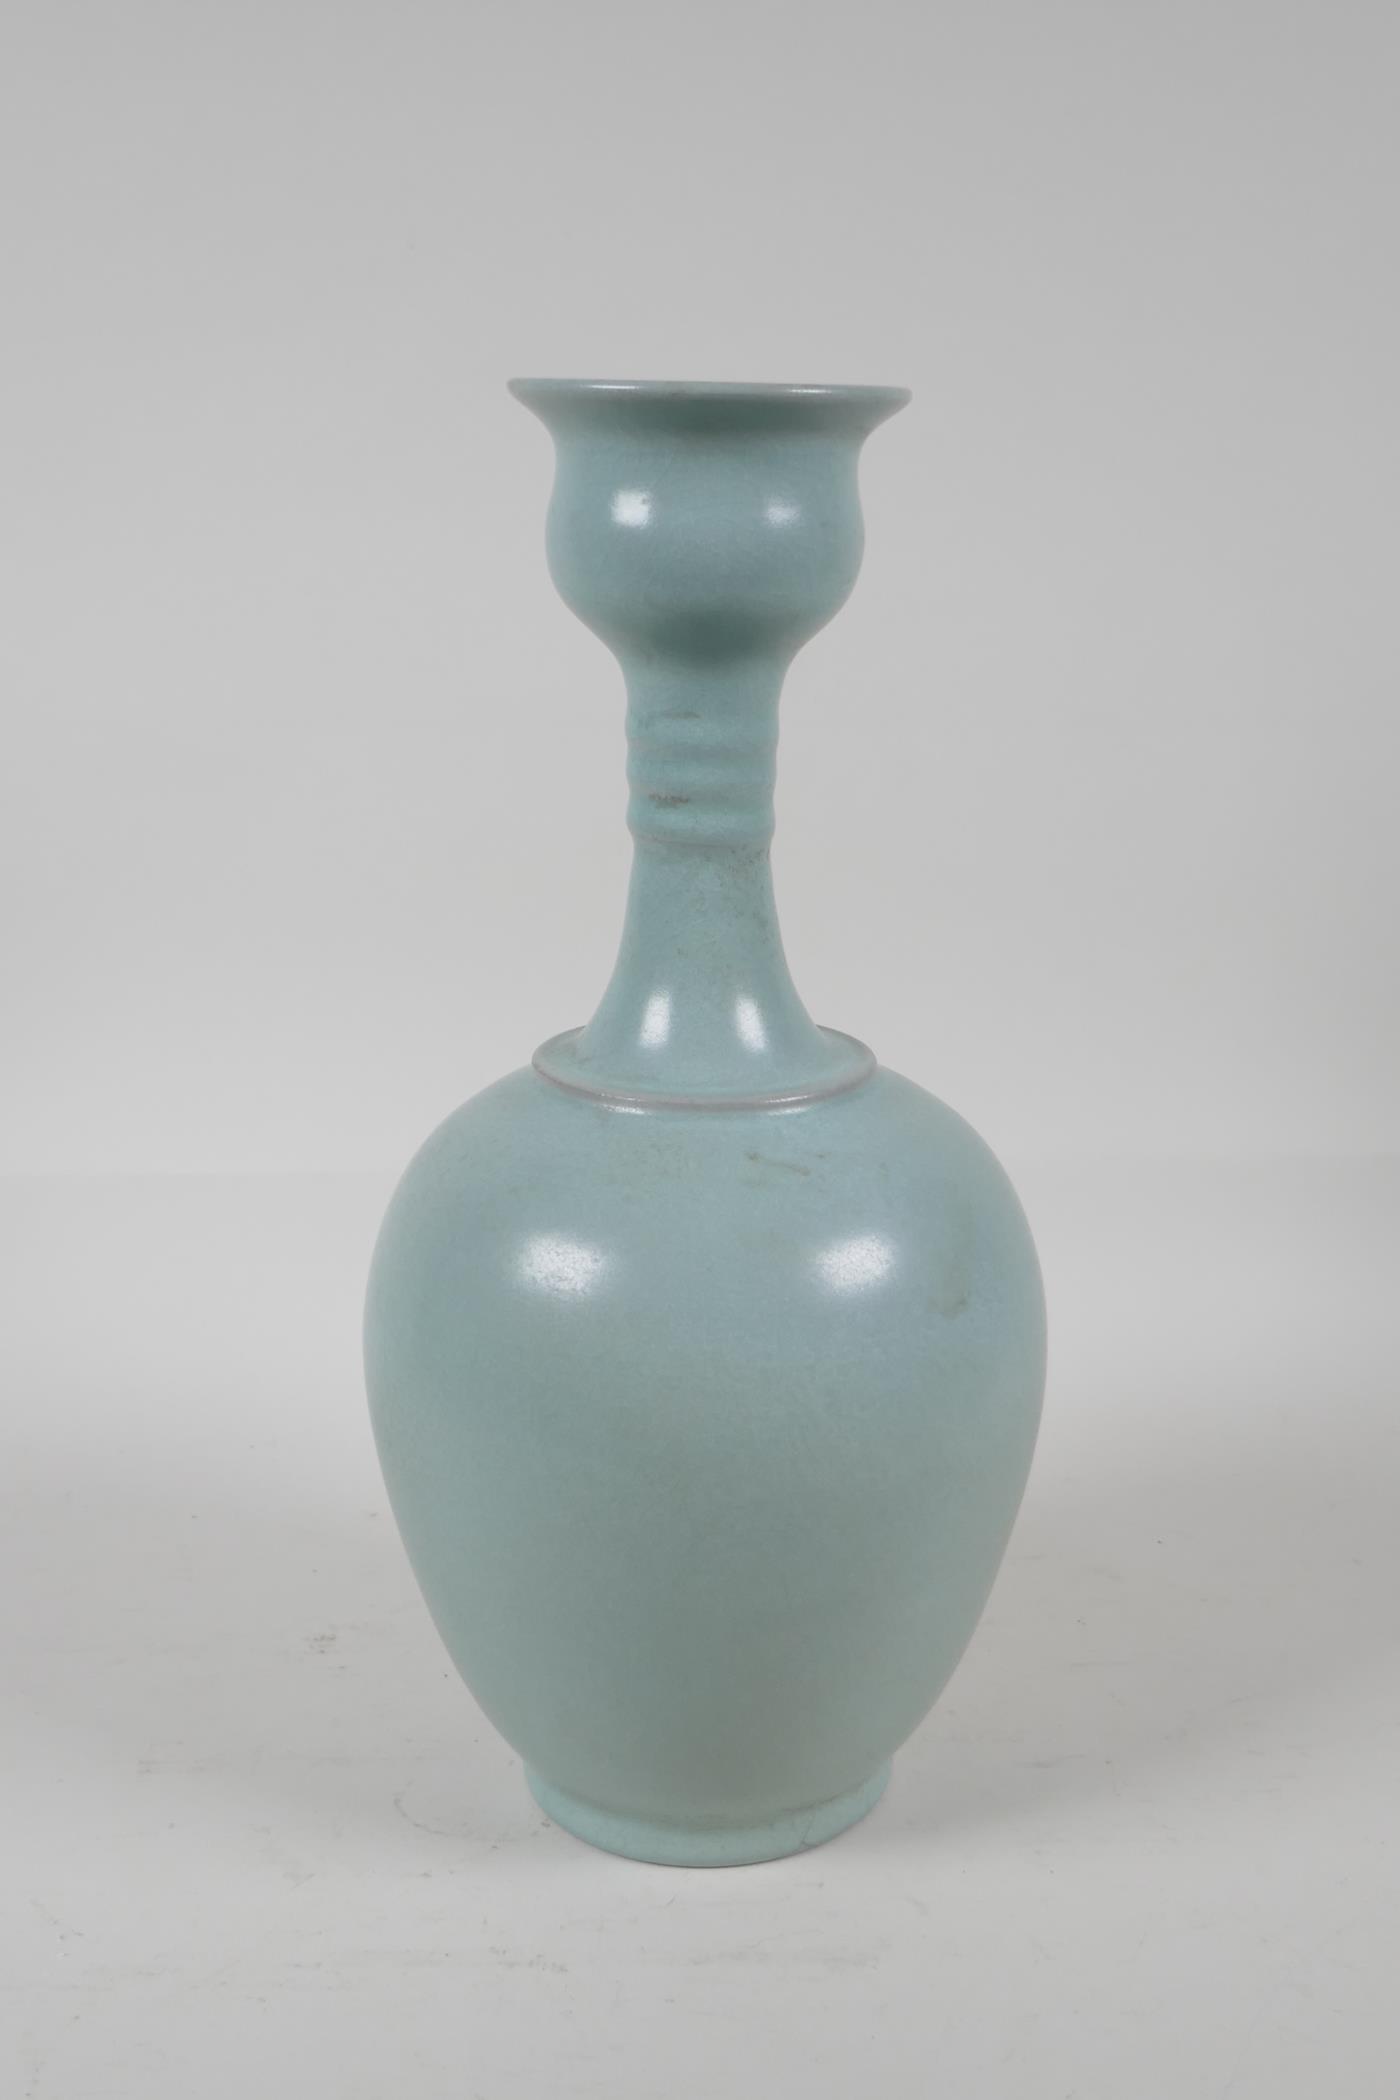 A celadon Ru ware style porcelain vase with engraved character inscription, 11" high